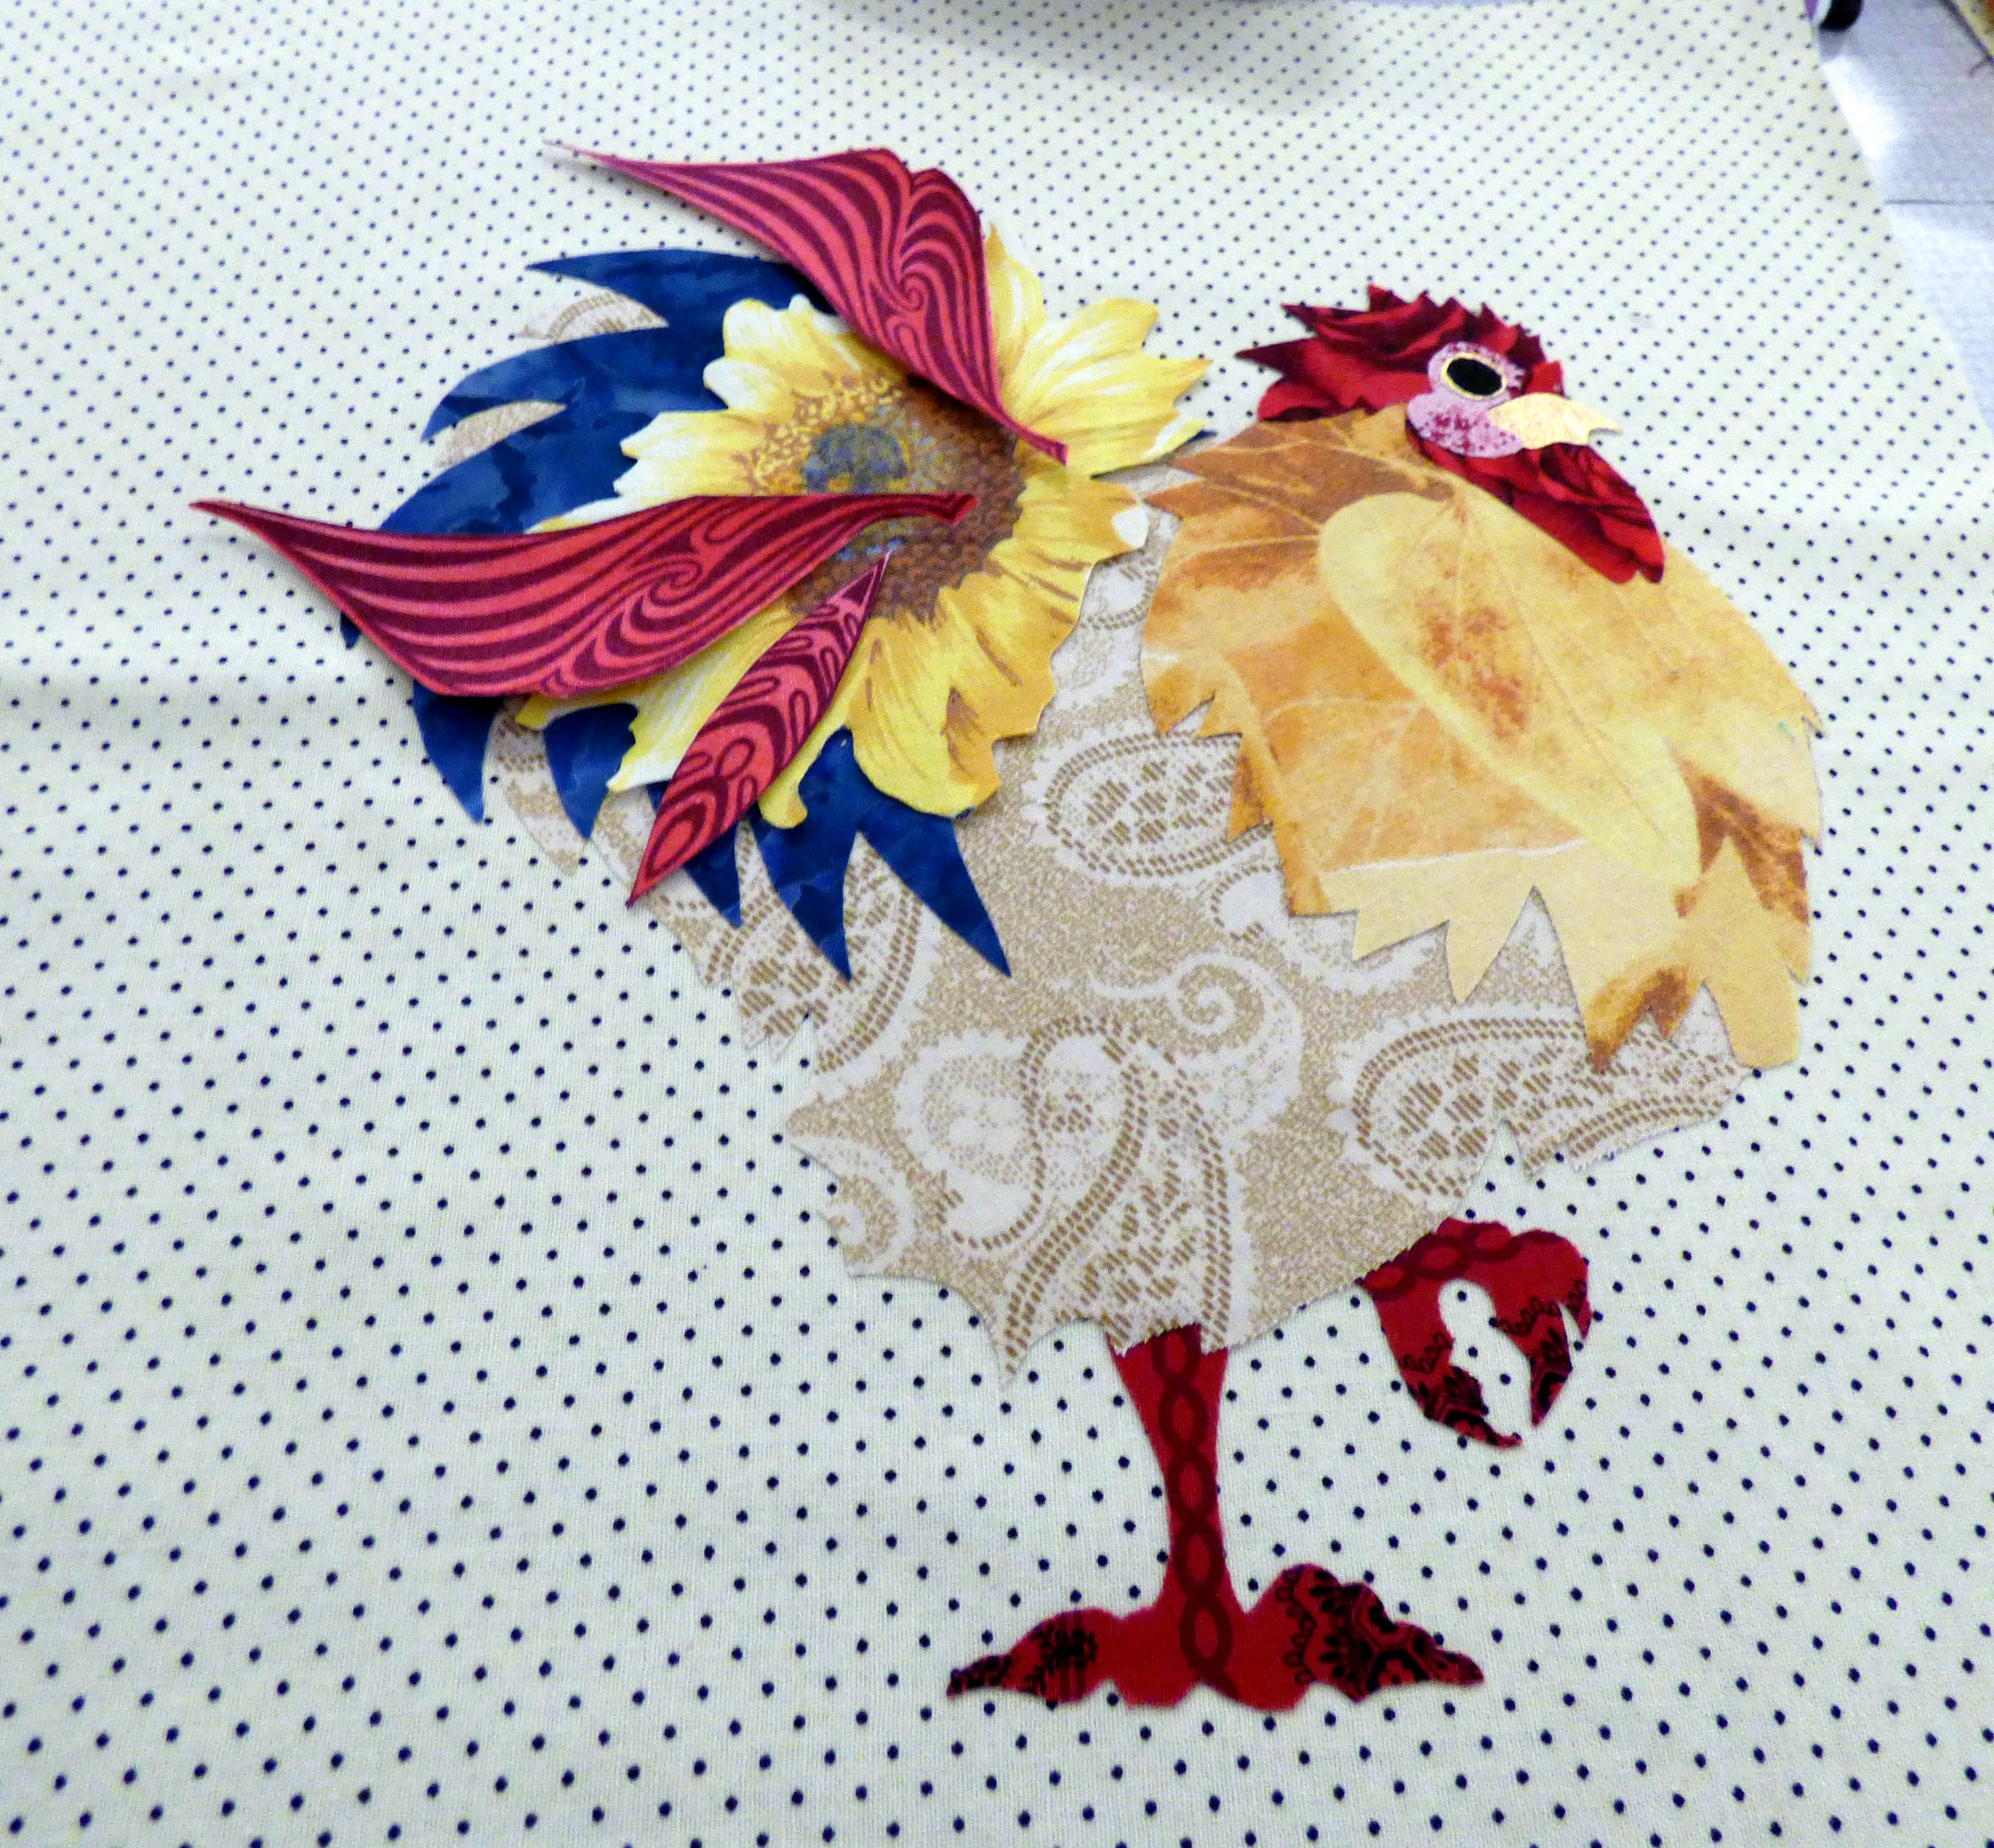 student's work in progress at Raw Edge Applique workshop with Lizzie Wall